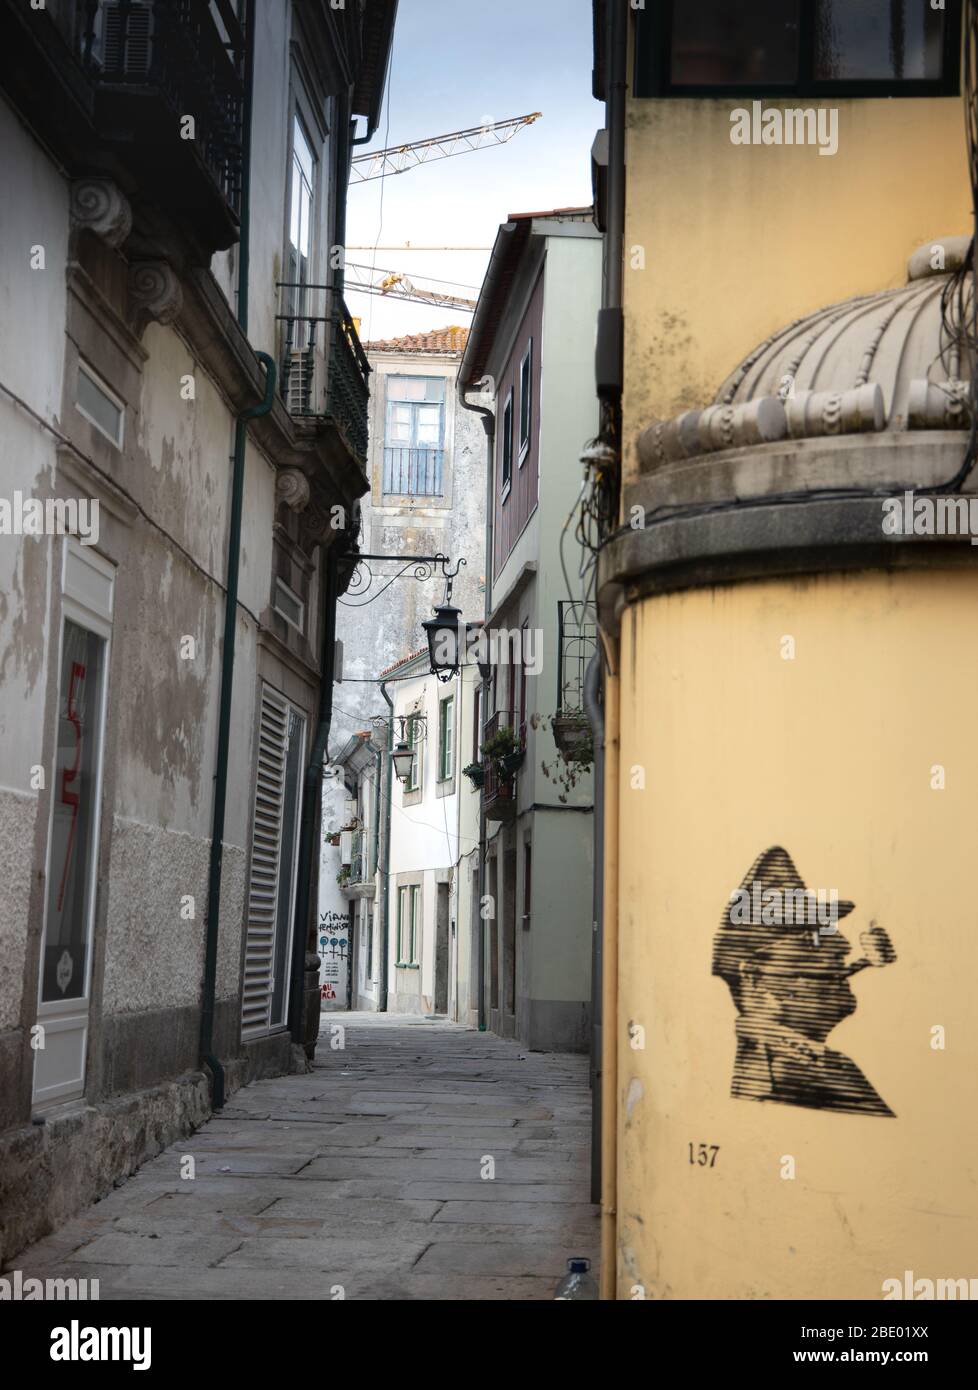 Typical traditional old narrow street of Viana Do Castelo Northern Portugal with little street art of a head of man smoking a pipe Stock Photo